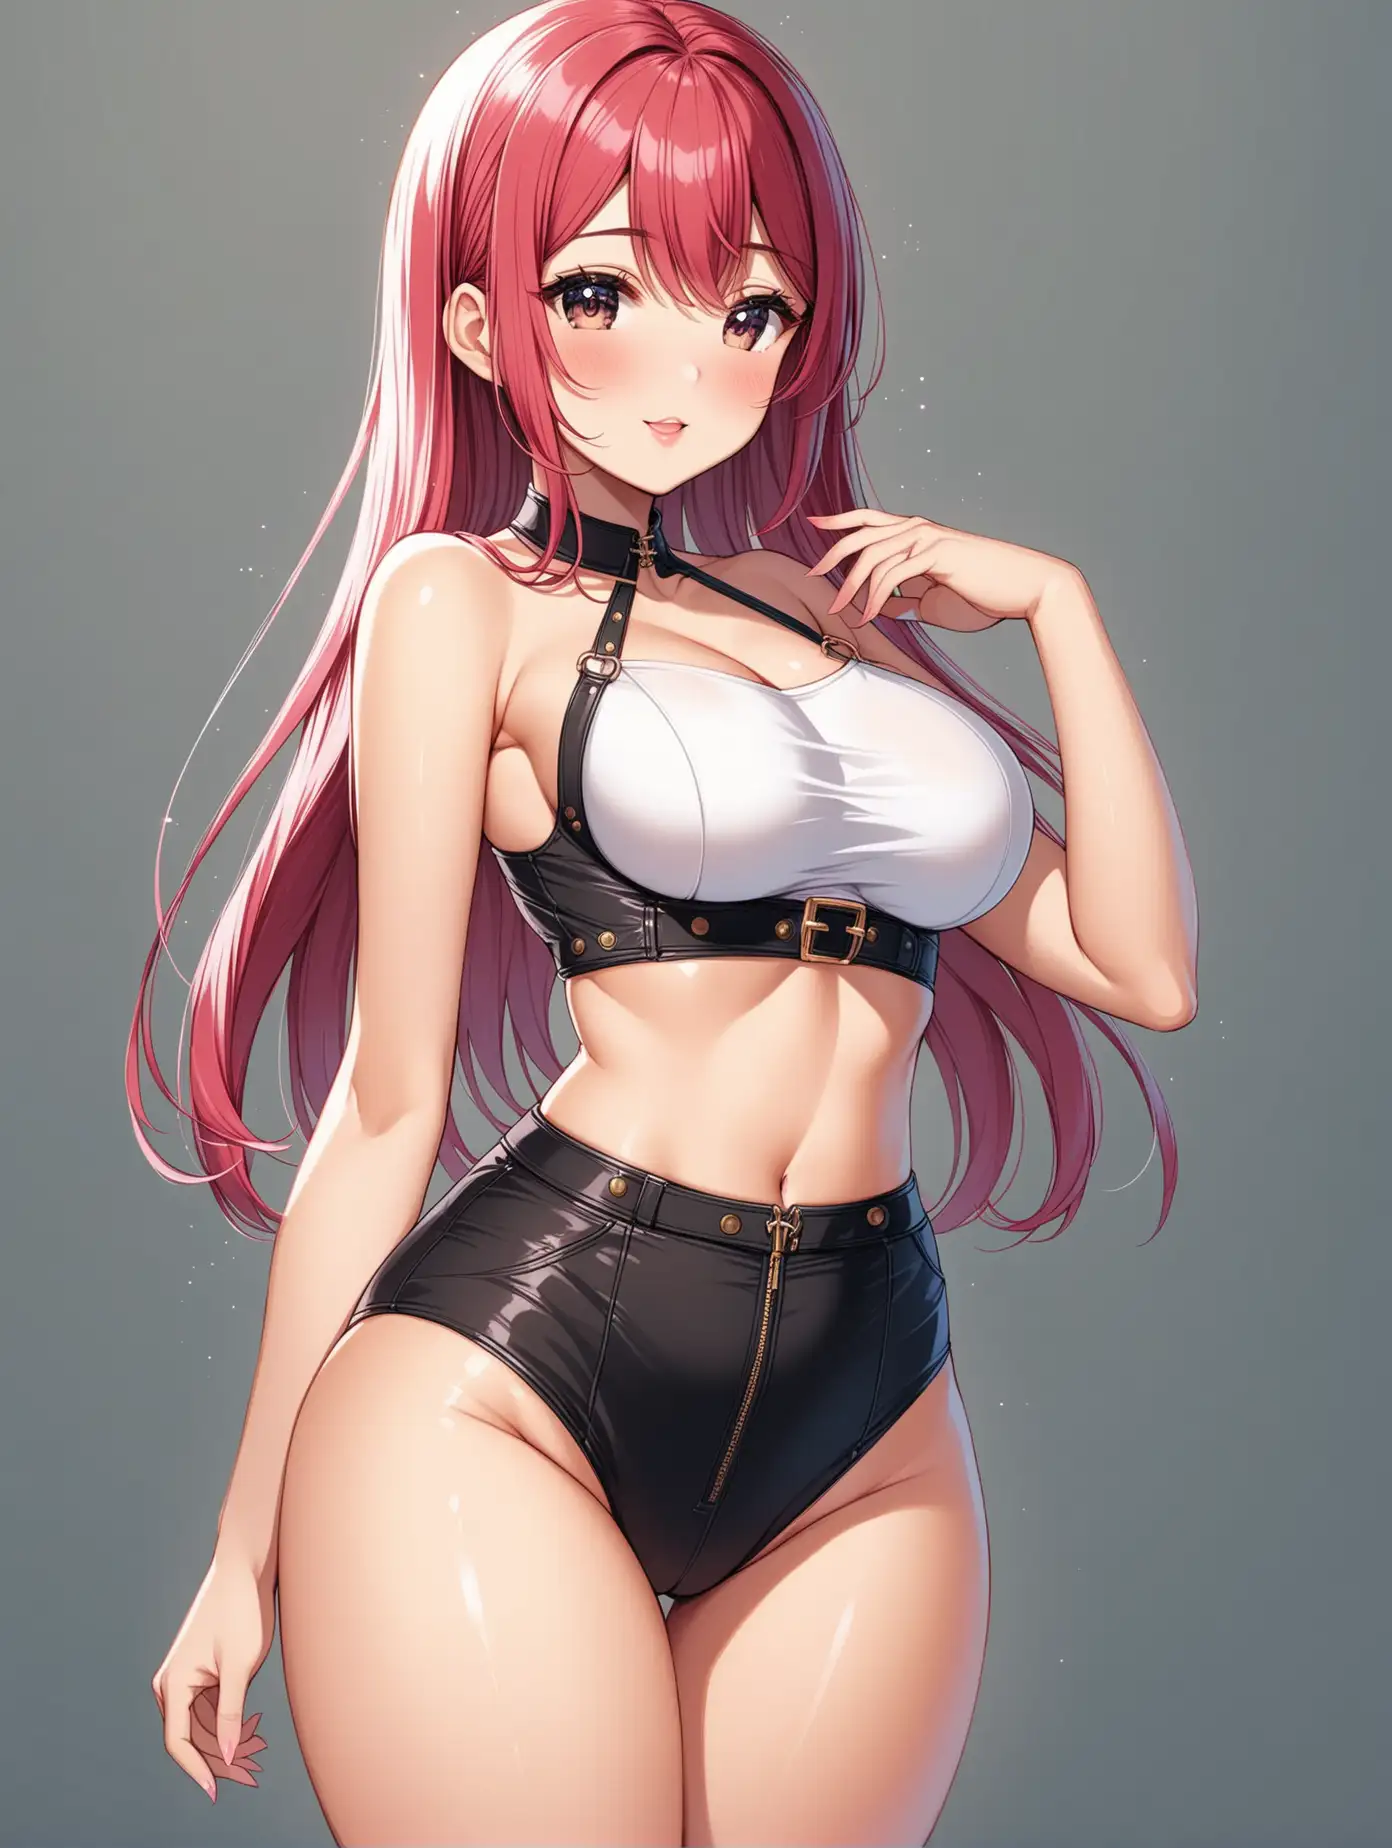 Sensually Dressed Waifu with Petite Waist and Voluptuous Curves